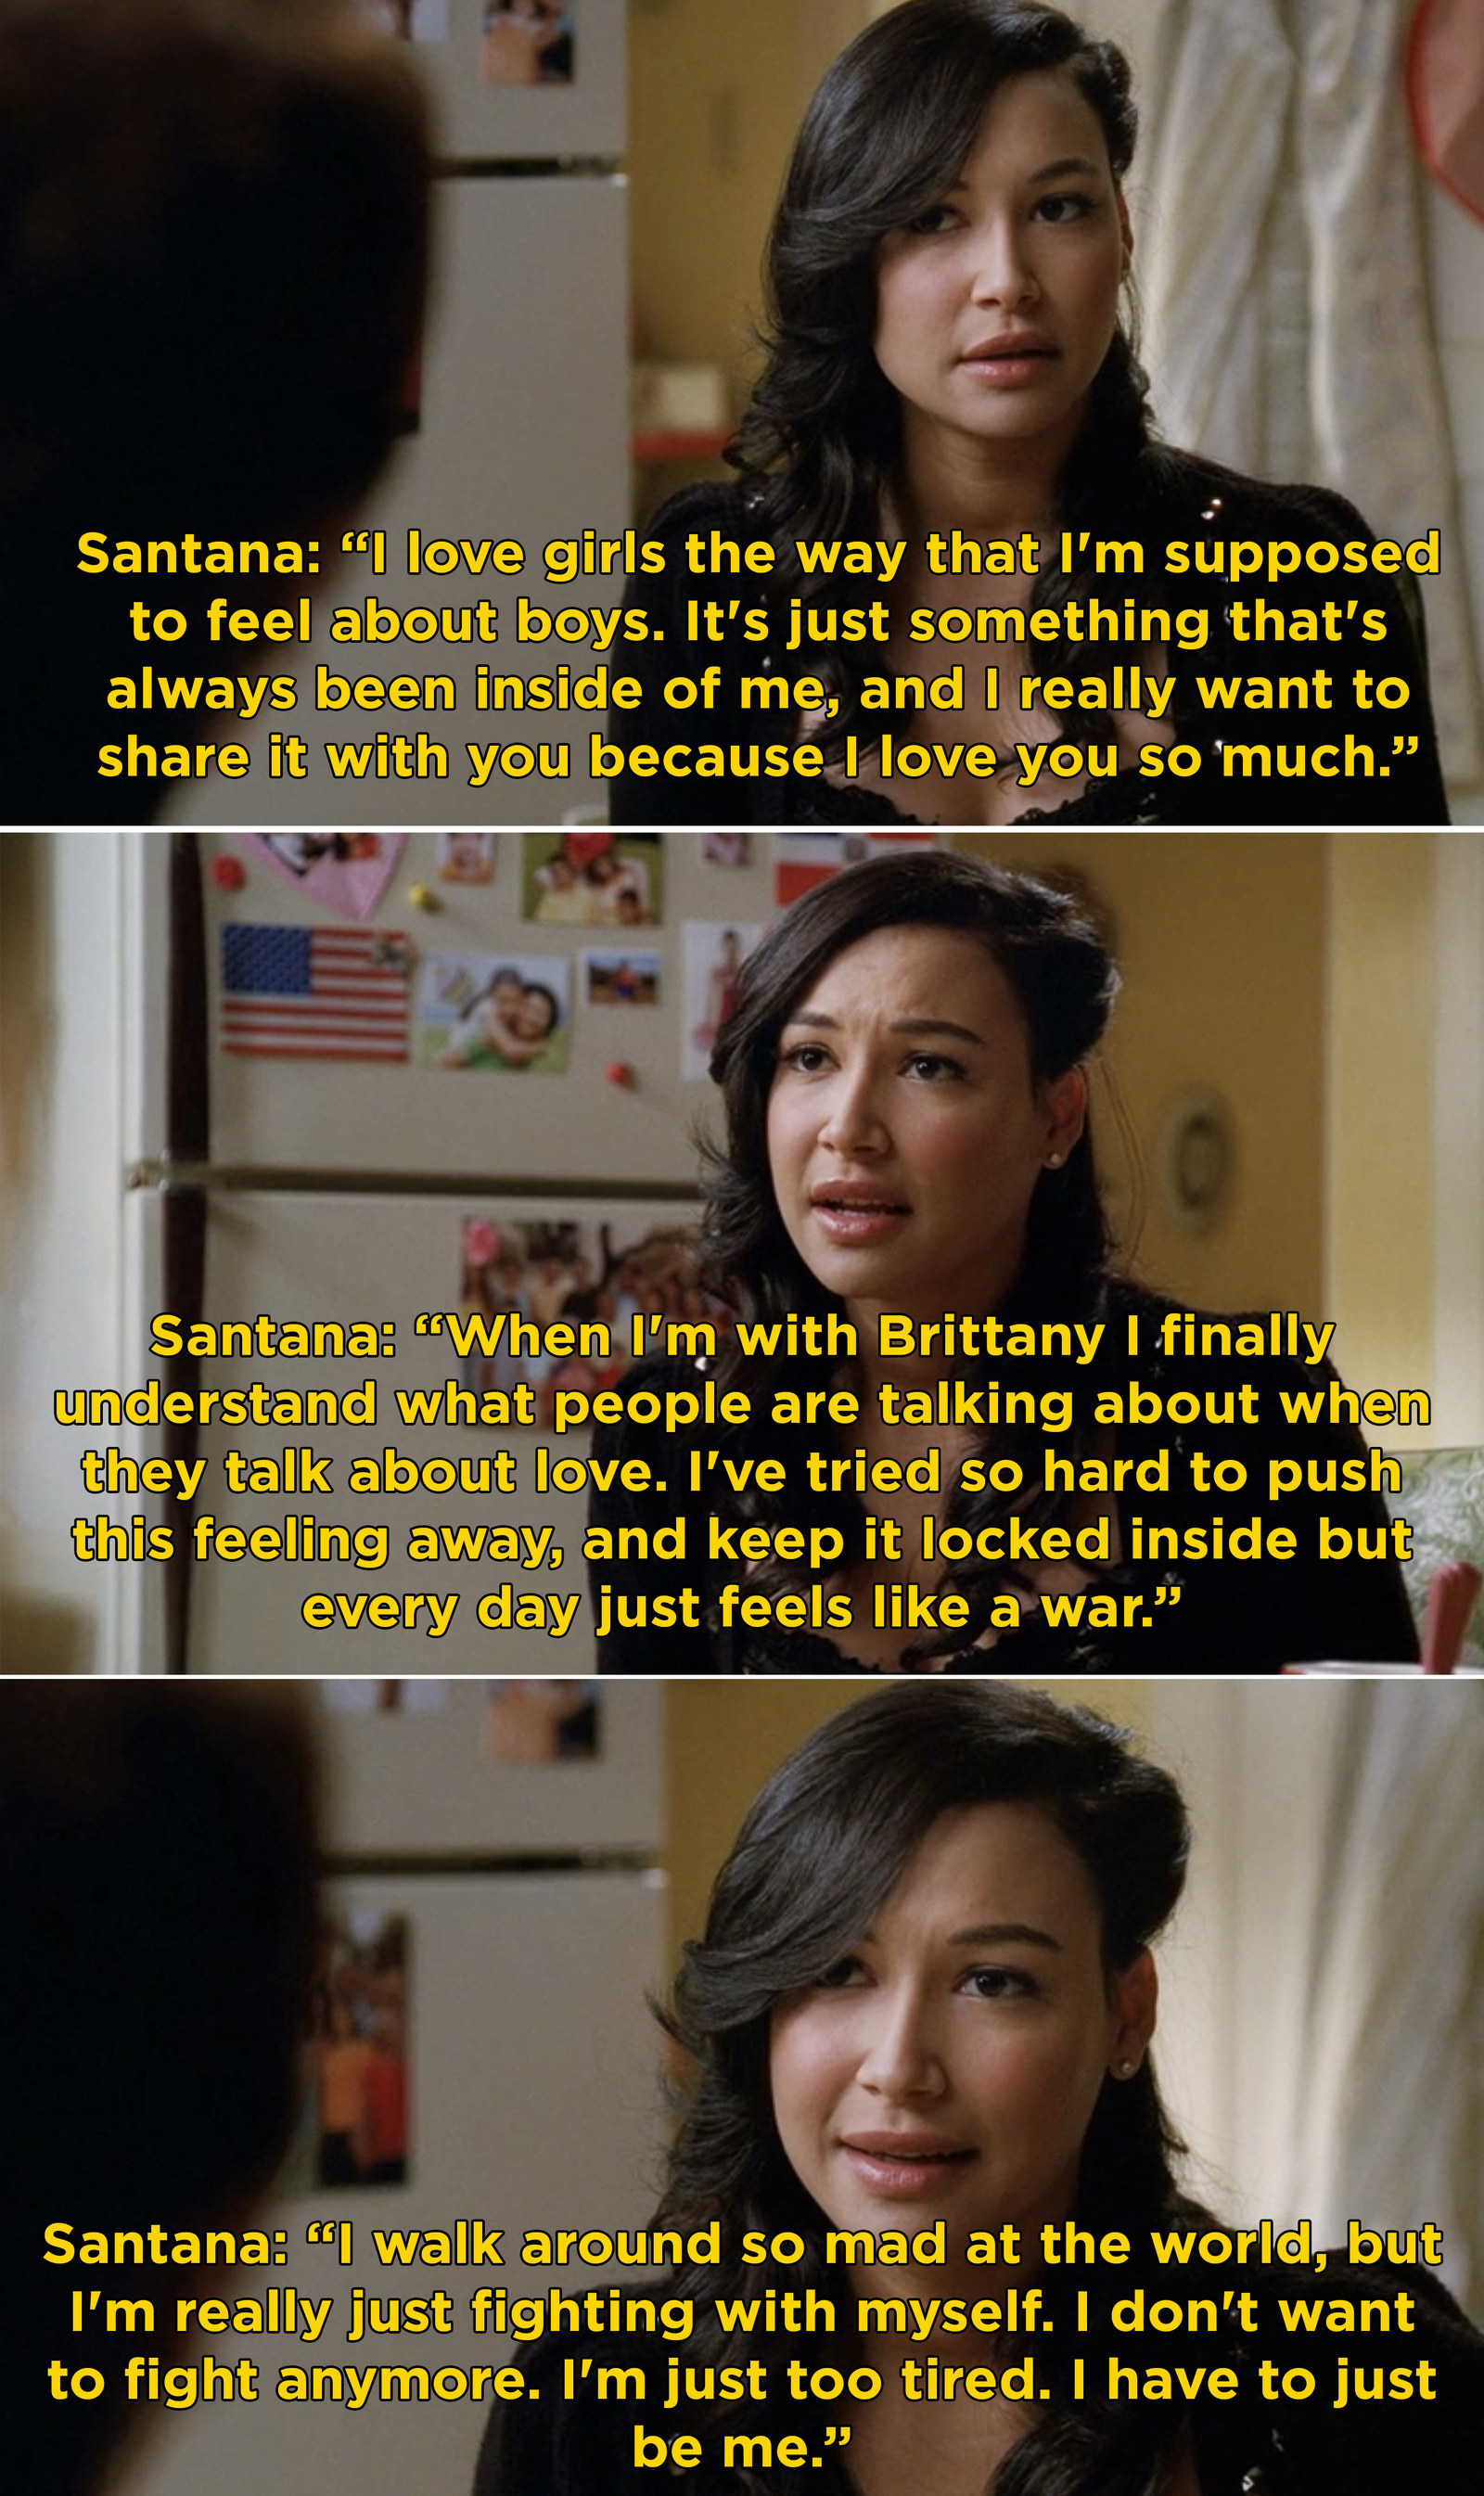 Santana tells her grandmother she &quot;loves girls the way she&#x27;s supposed to feel about boys&quot; and that she has to stop fighting with the world and just be herself